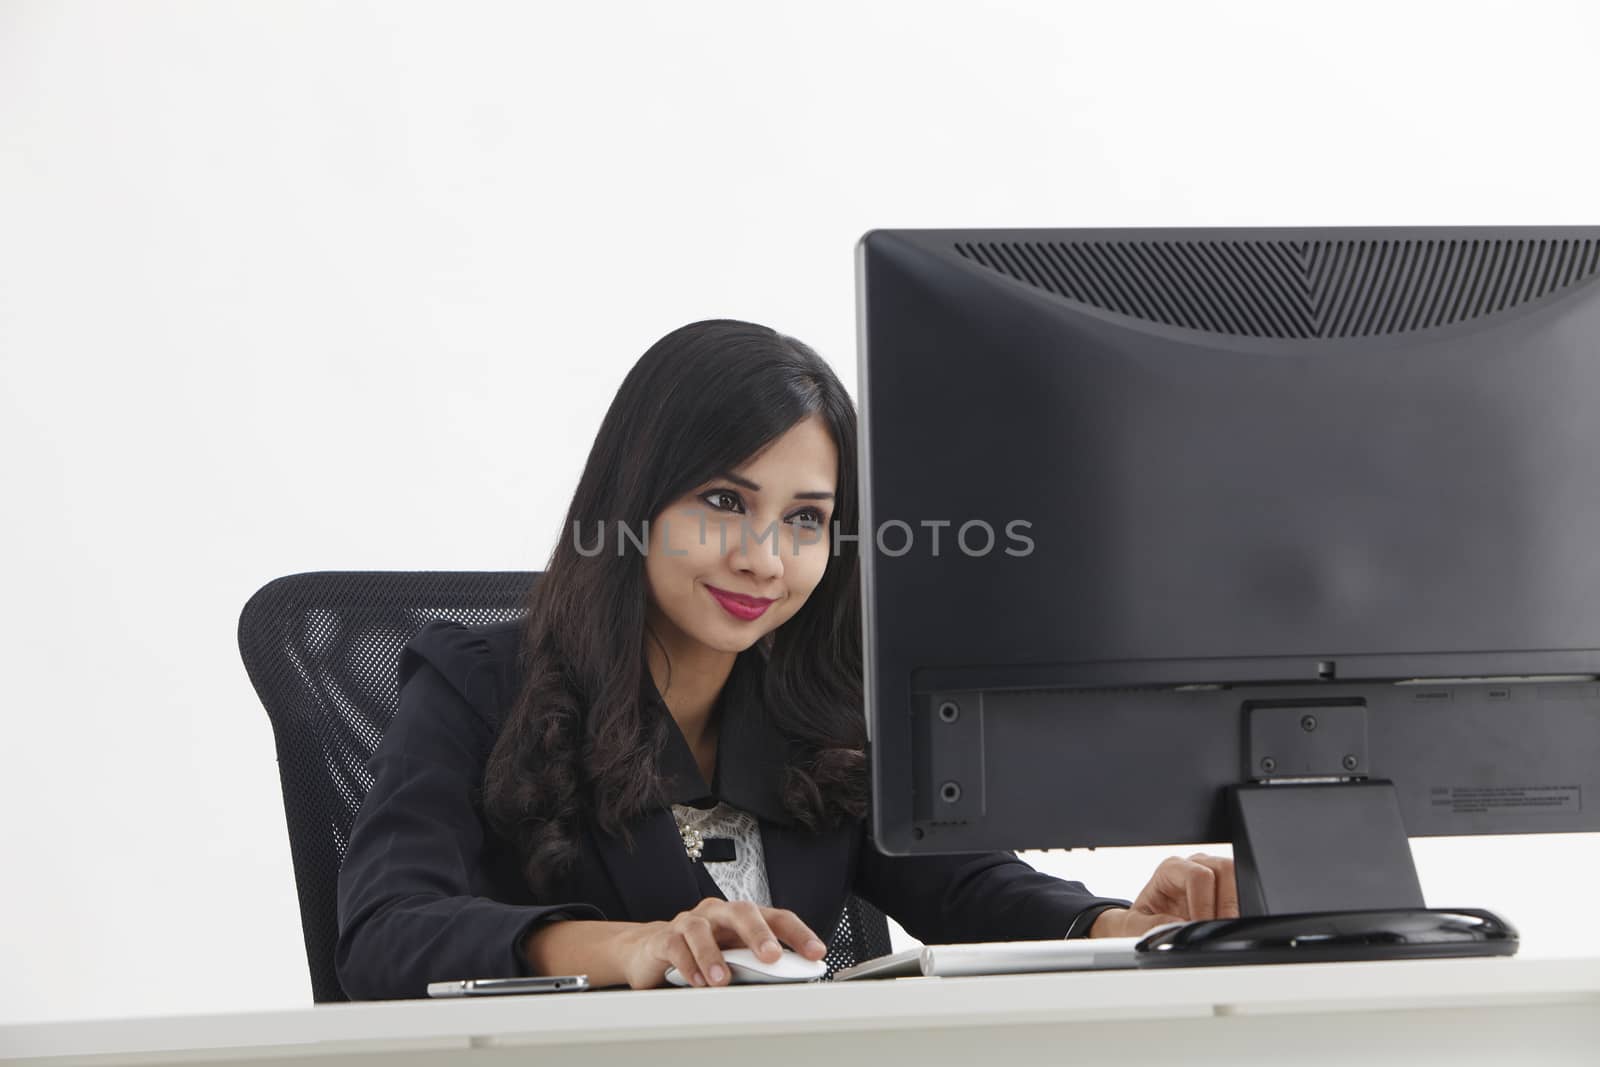 business woman sitting in front monitor working